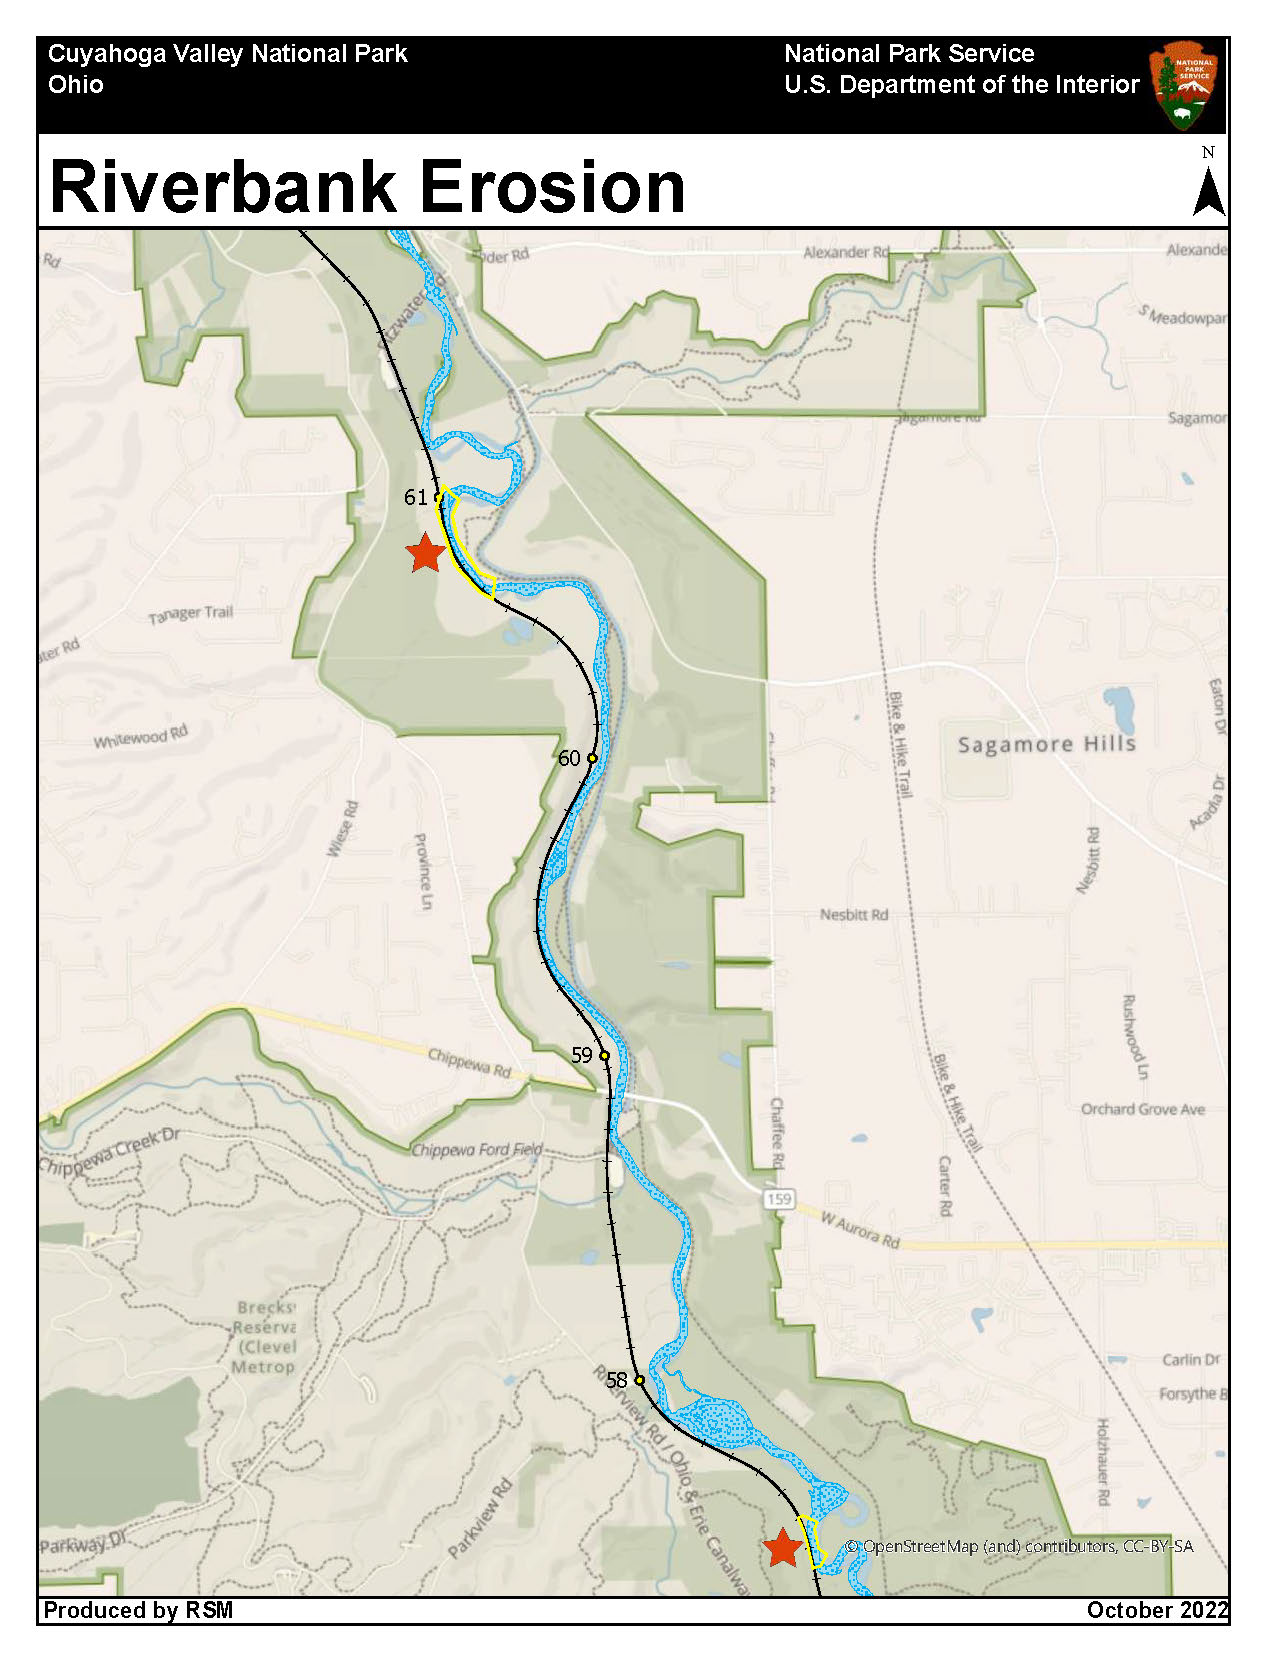 A map of the Cuyahoga River with two stars at the locations of the railroad track closures. The top closure is near mile marker 61 and the second closure is below mile marker 58.